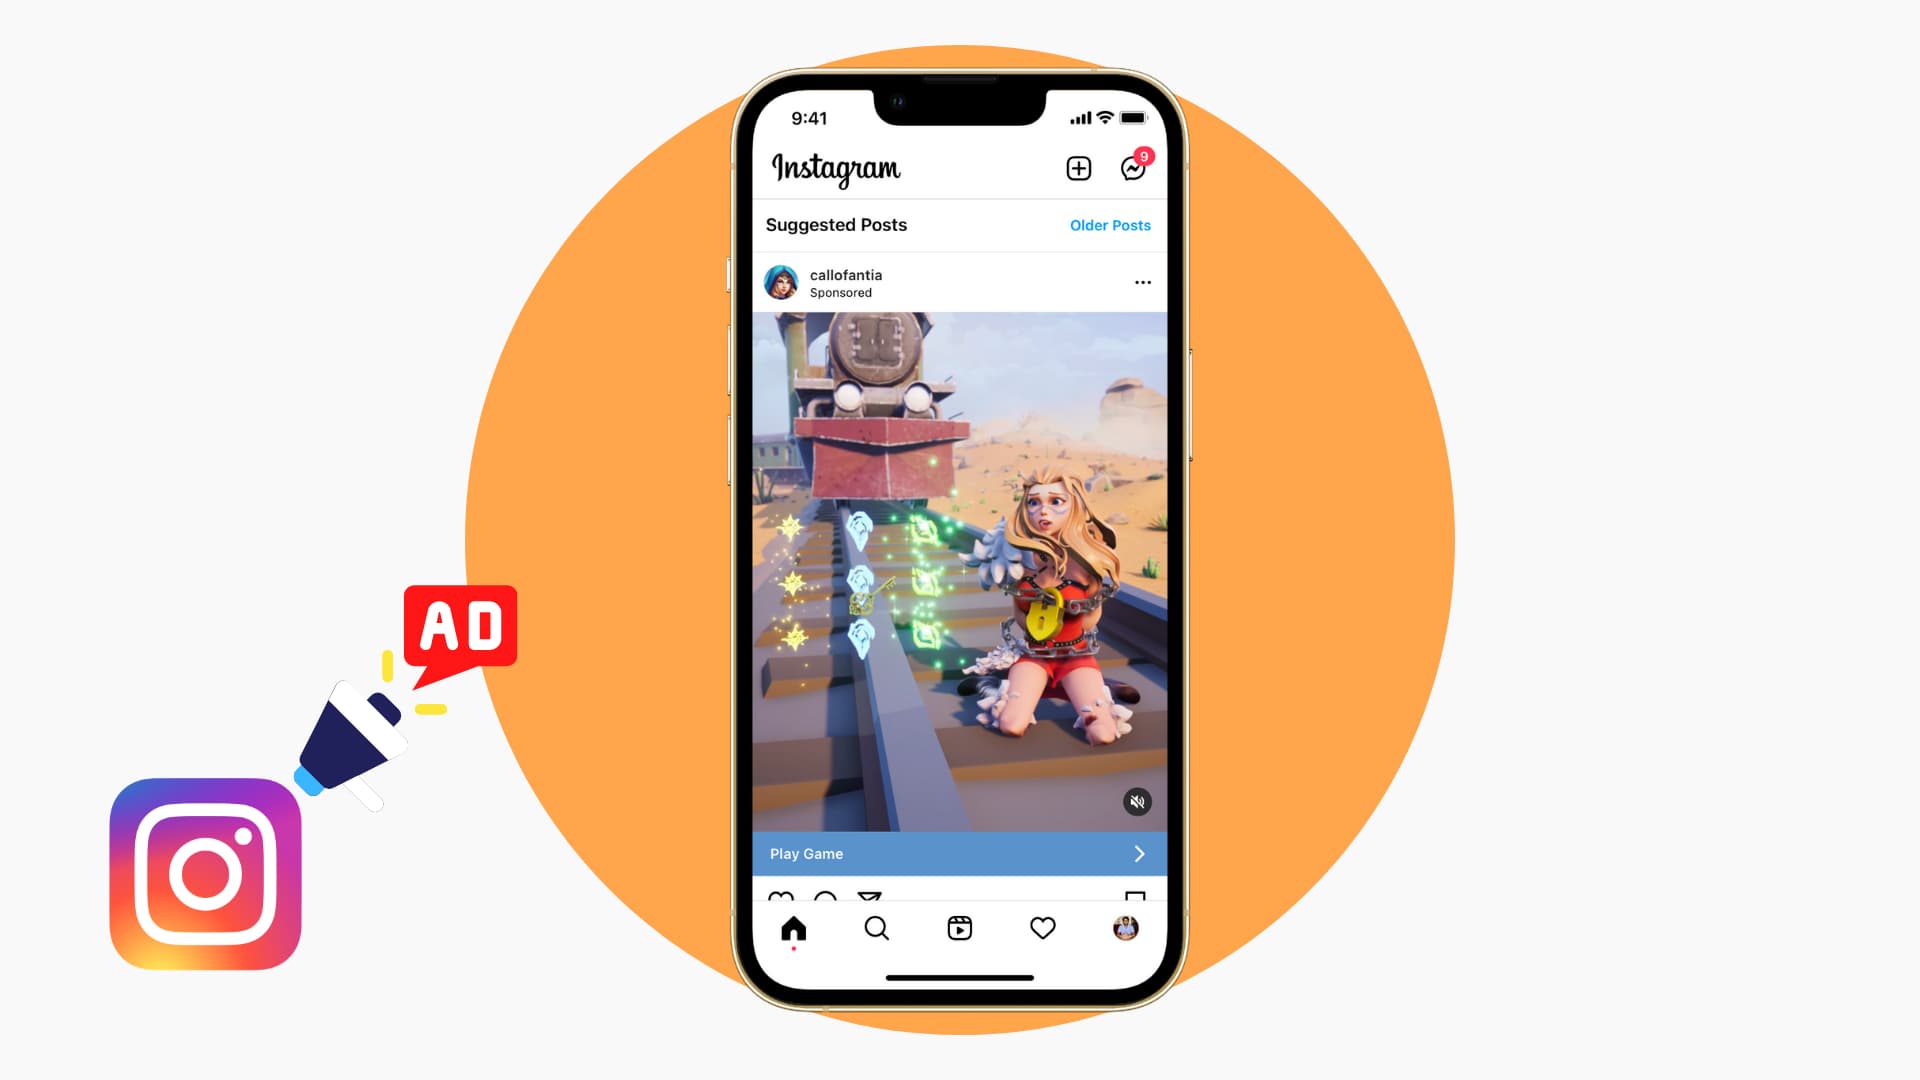 How to block and stop seeing ads on Instagram